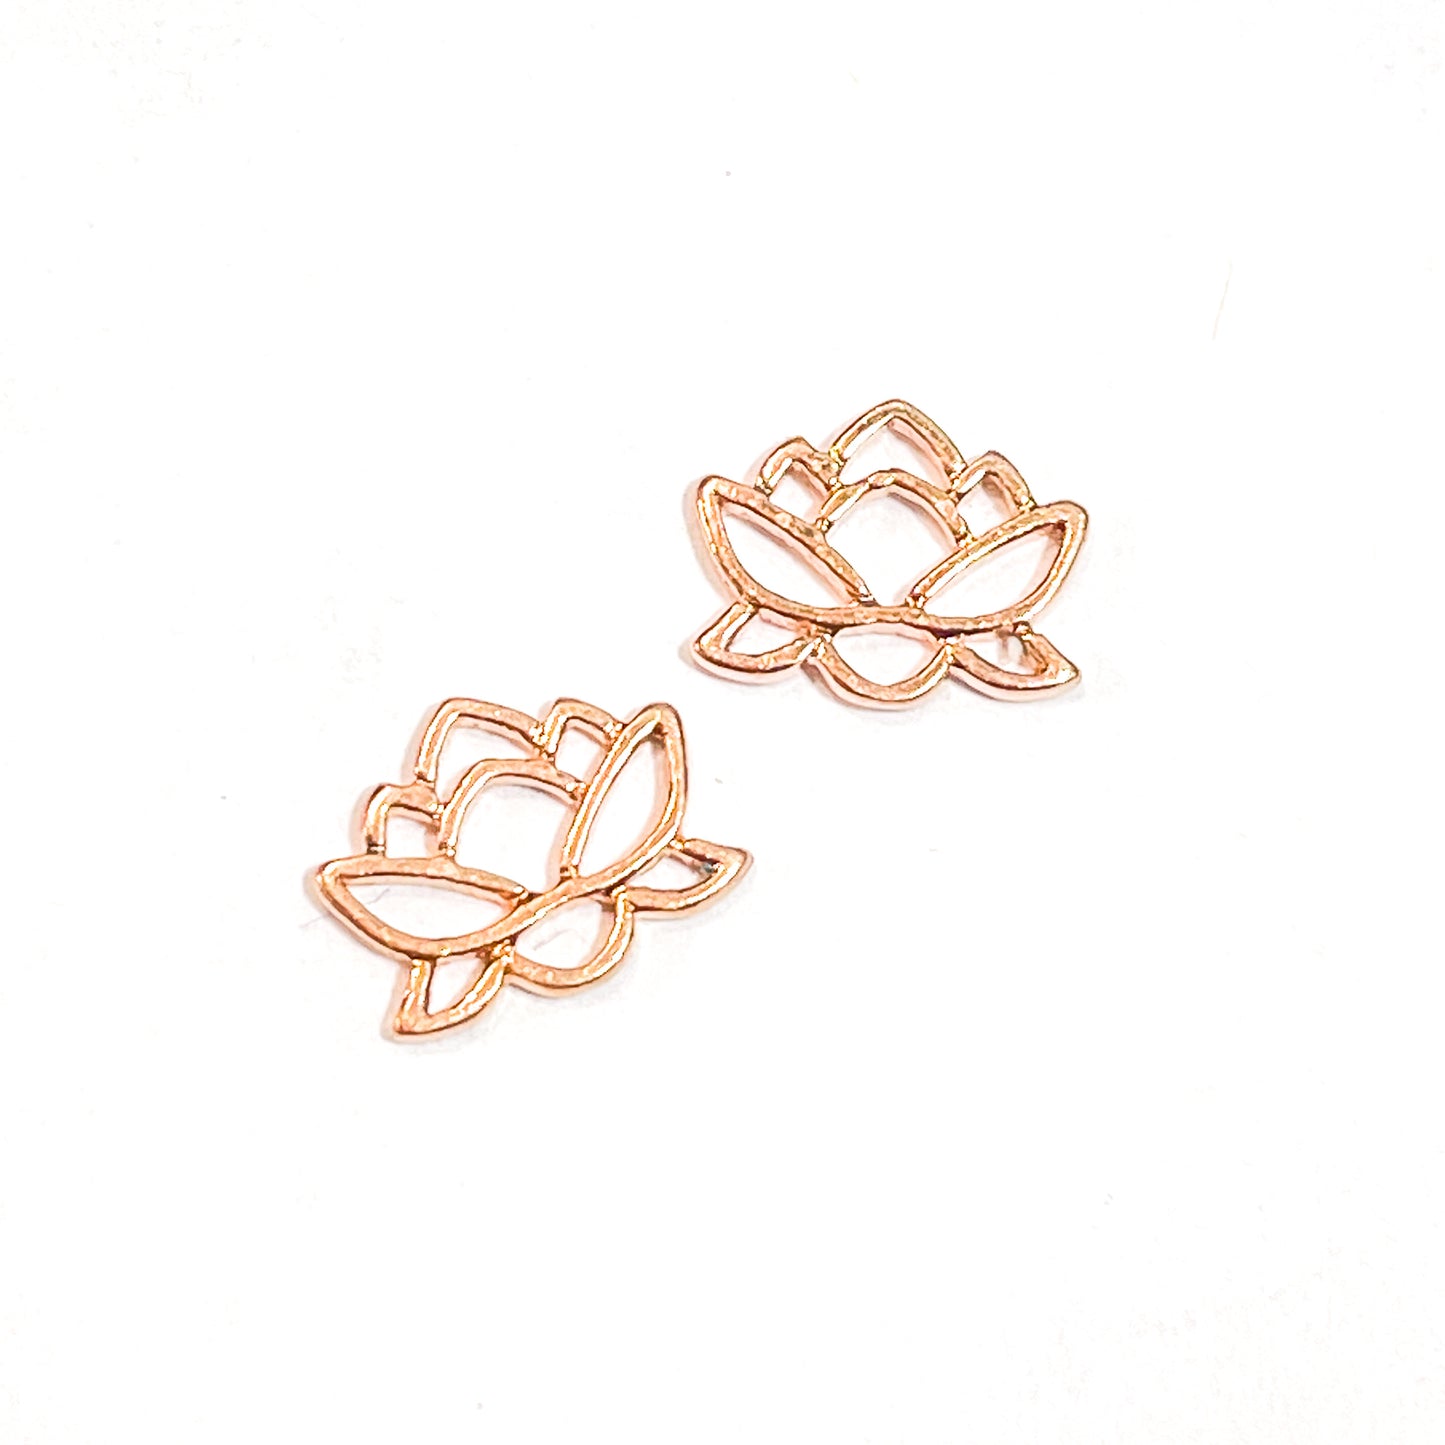 Small Full Lotus Bloom Link Charm (3 Colors Available) - 1 pc.